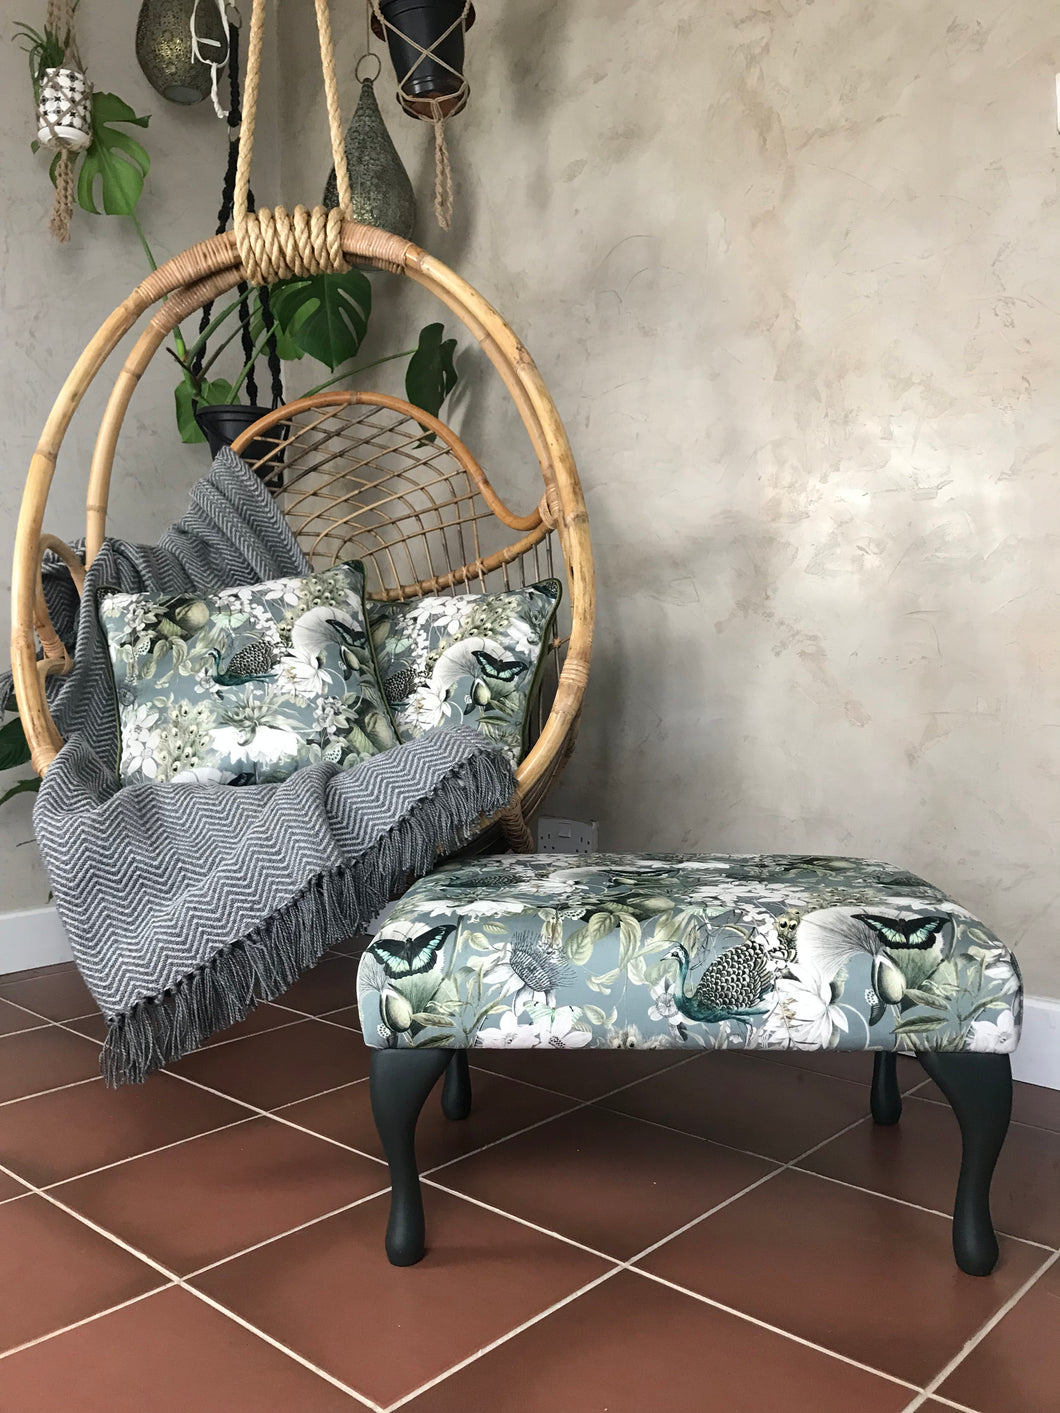 grey and green peacock luxury velvet footstool - green leaves & butterflies design - handmade new footstool - From Loft to Loved Interiors